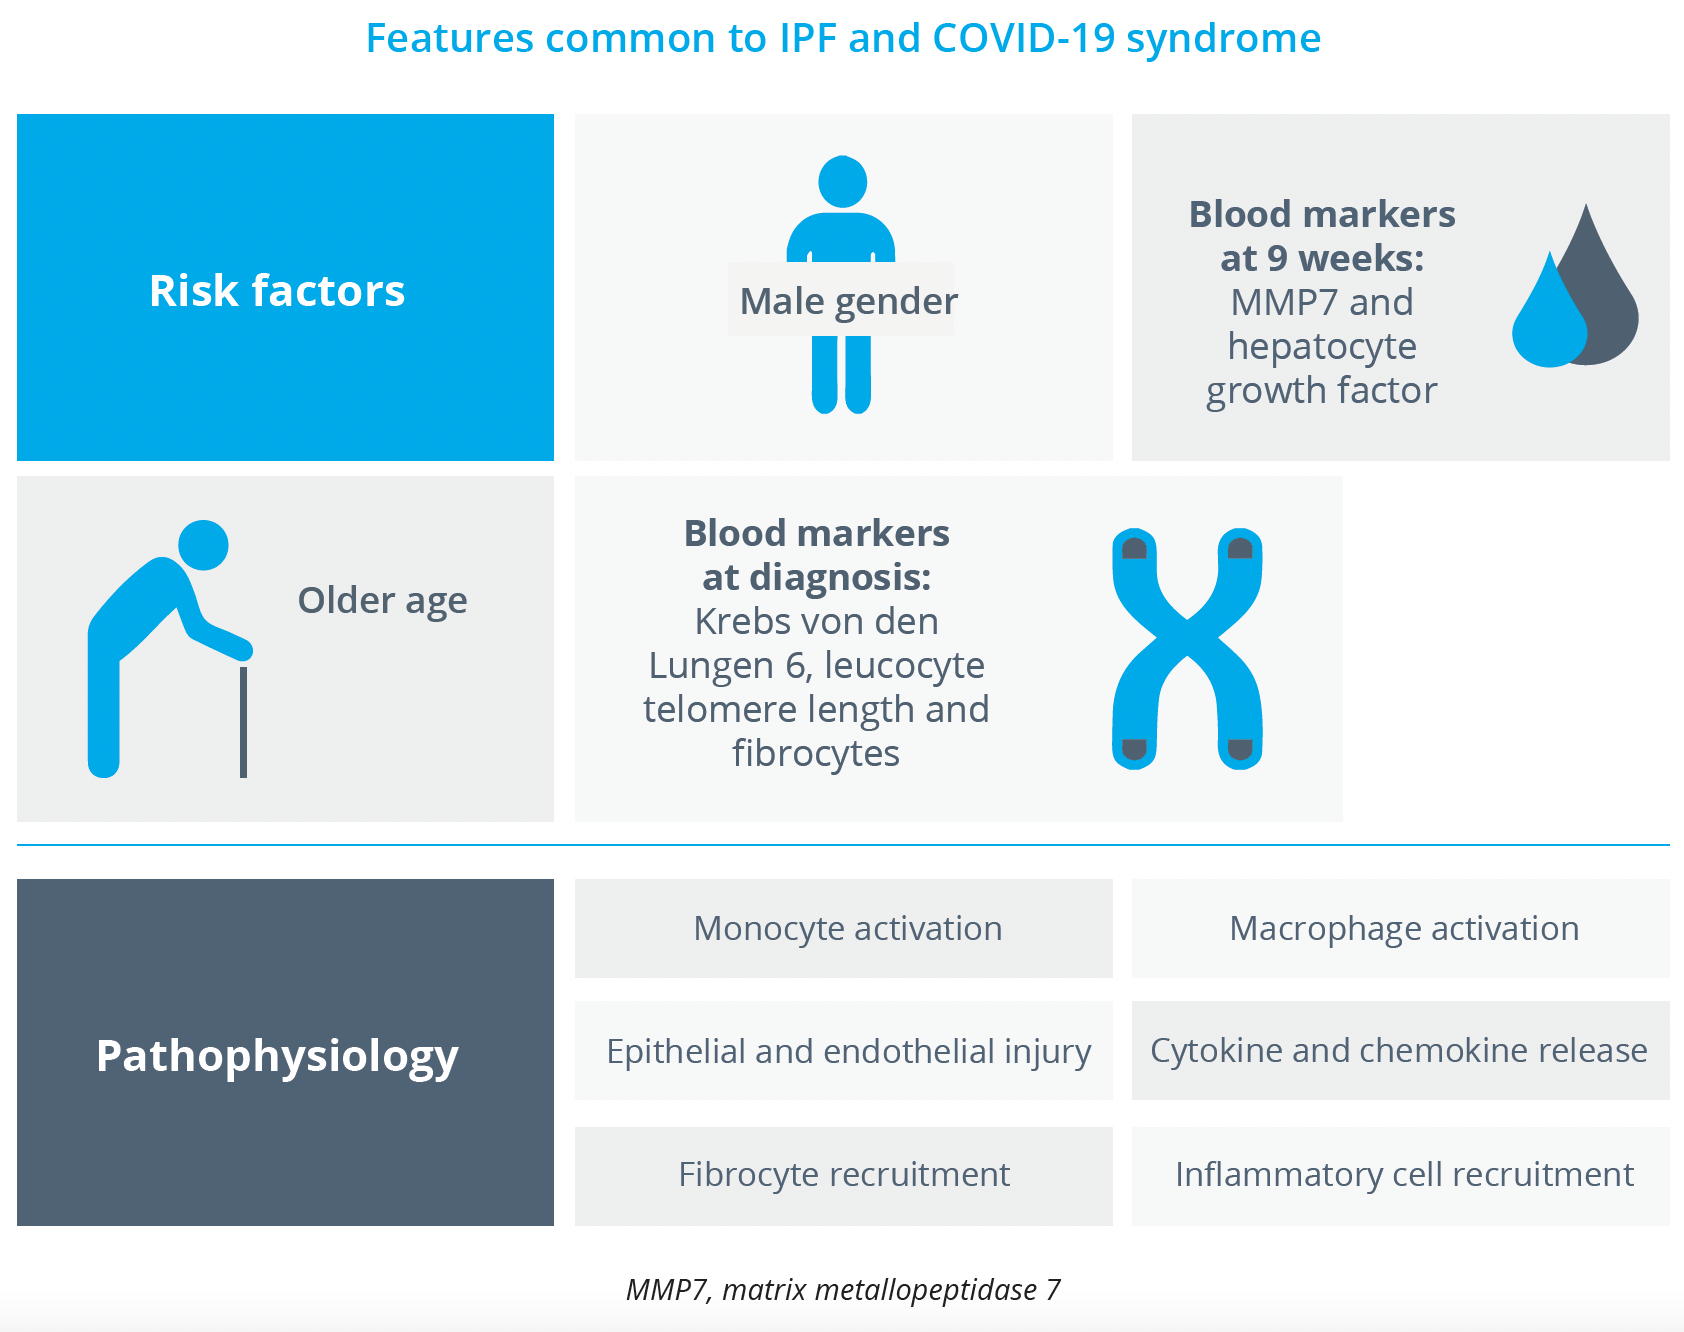 Risk factors and pathophysiological features common to IPF and COVID-19